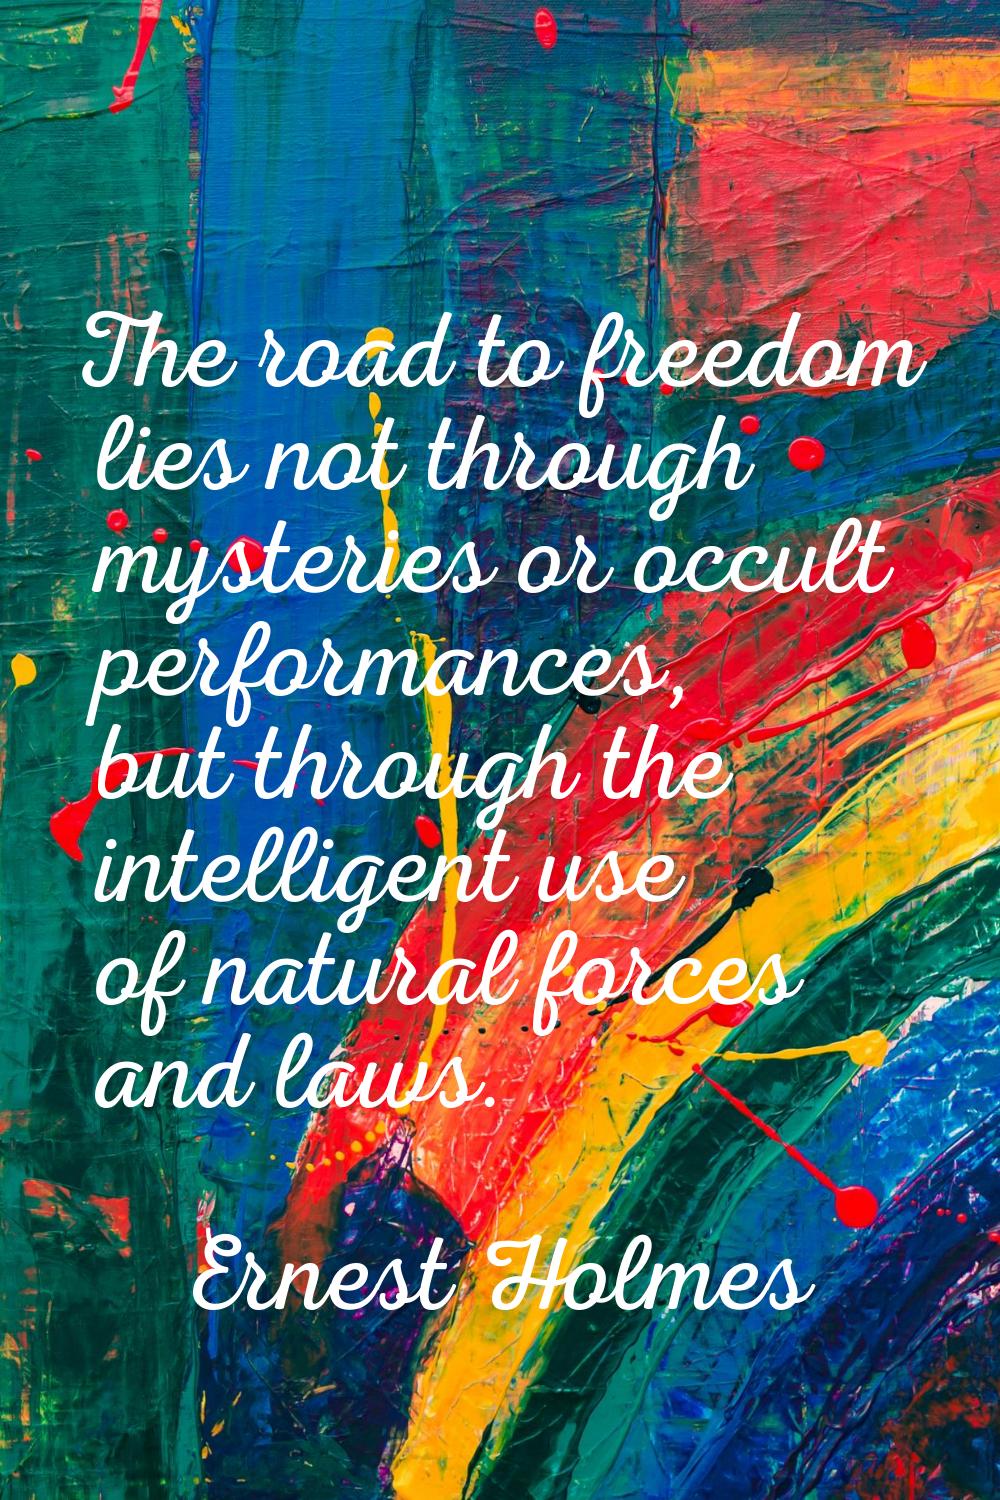 The road to freedom lies not through mysteries or occult performances, but through the intelligent 